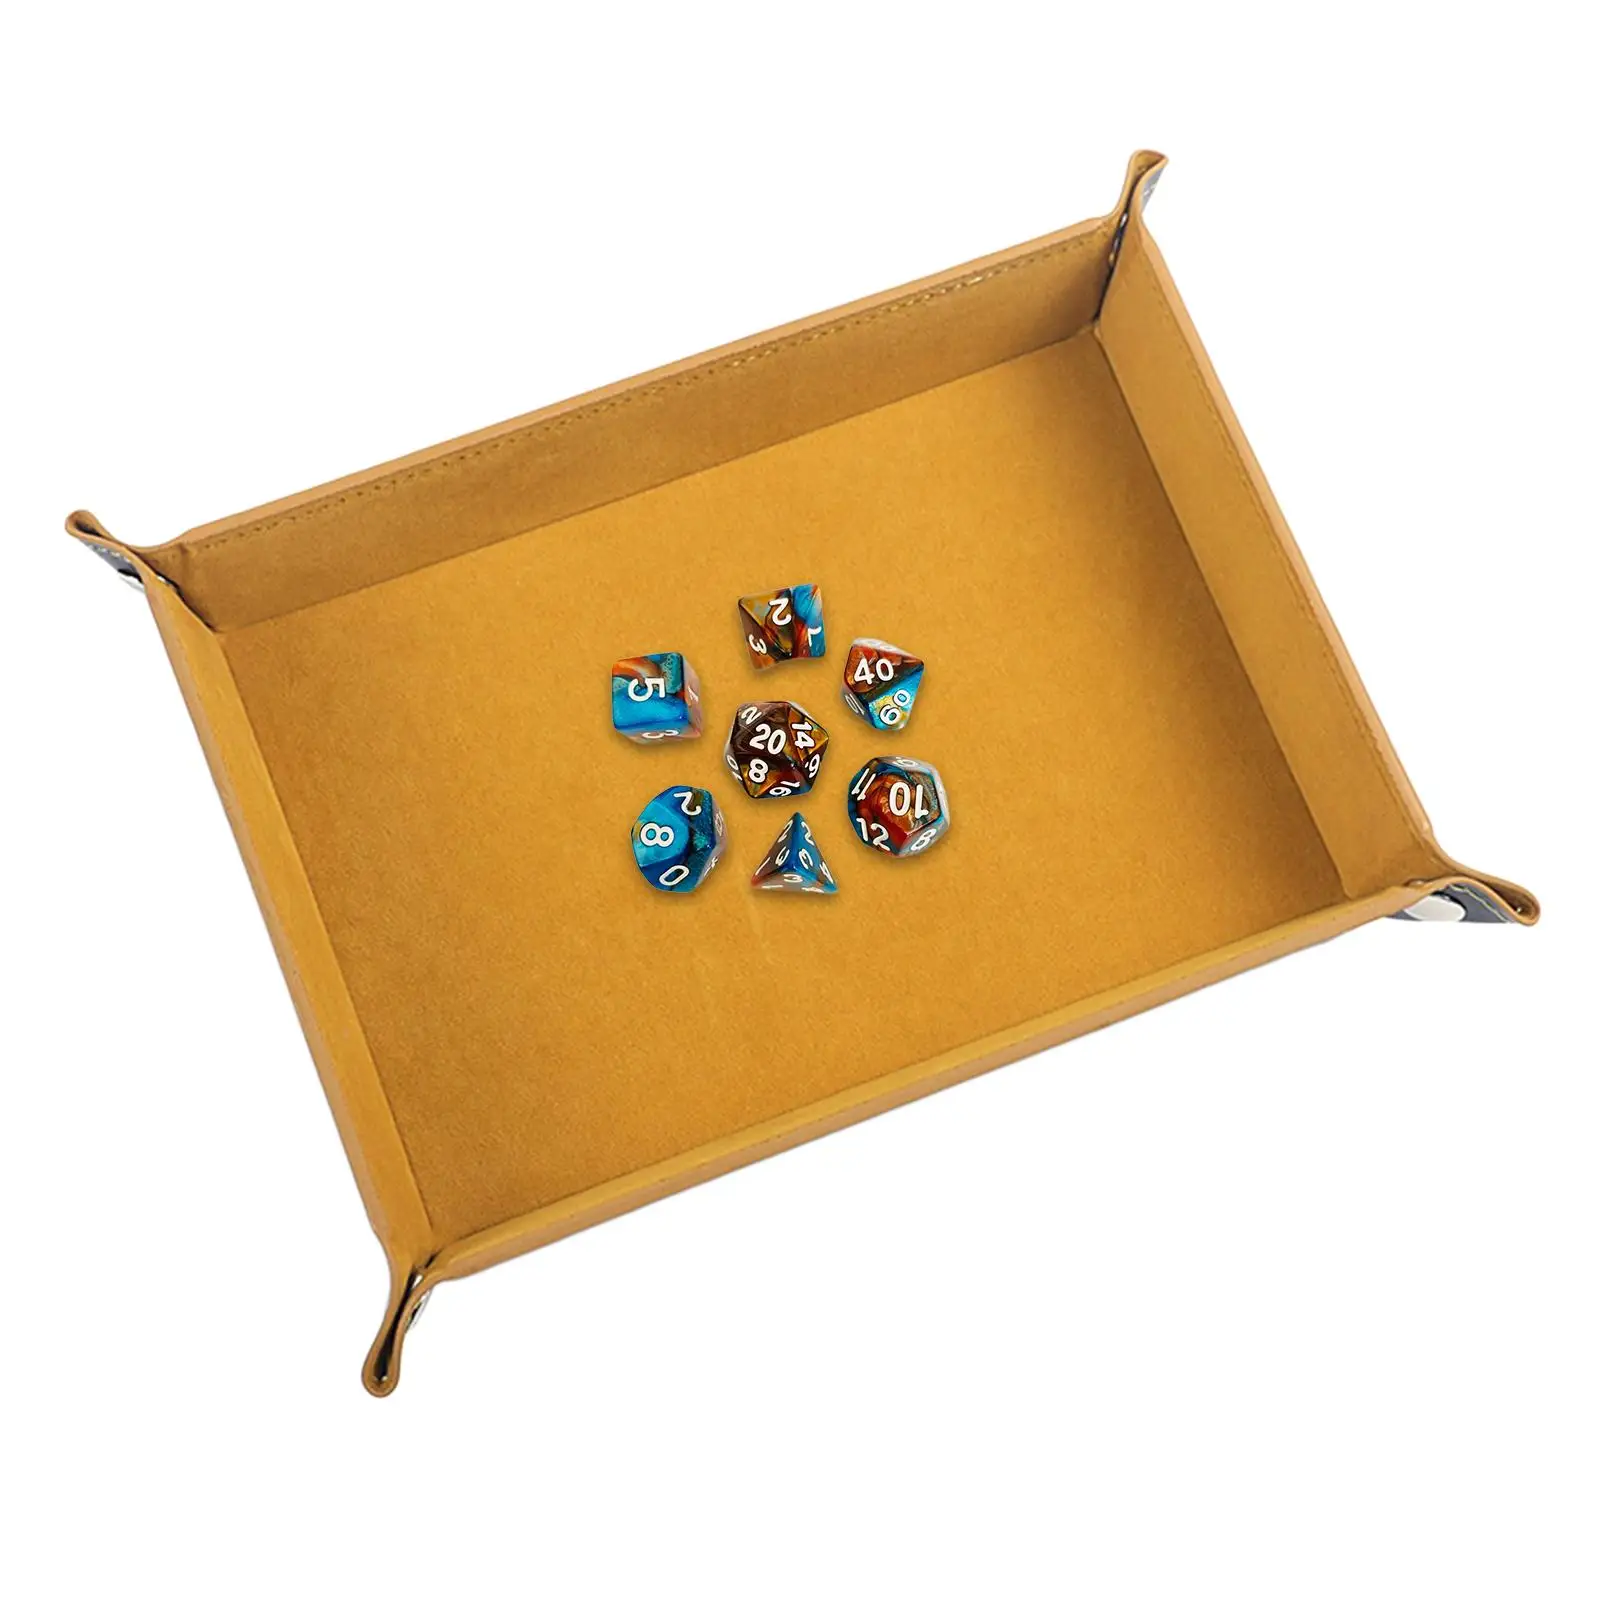 Dice Tray PU Leather Dice Rolling Tray Holder for Games Like RPG, DND, Drinking Bar Board Game Supplies